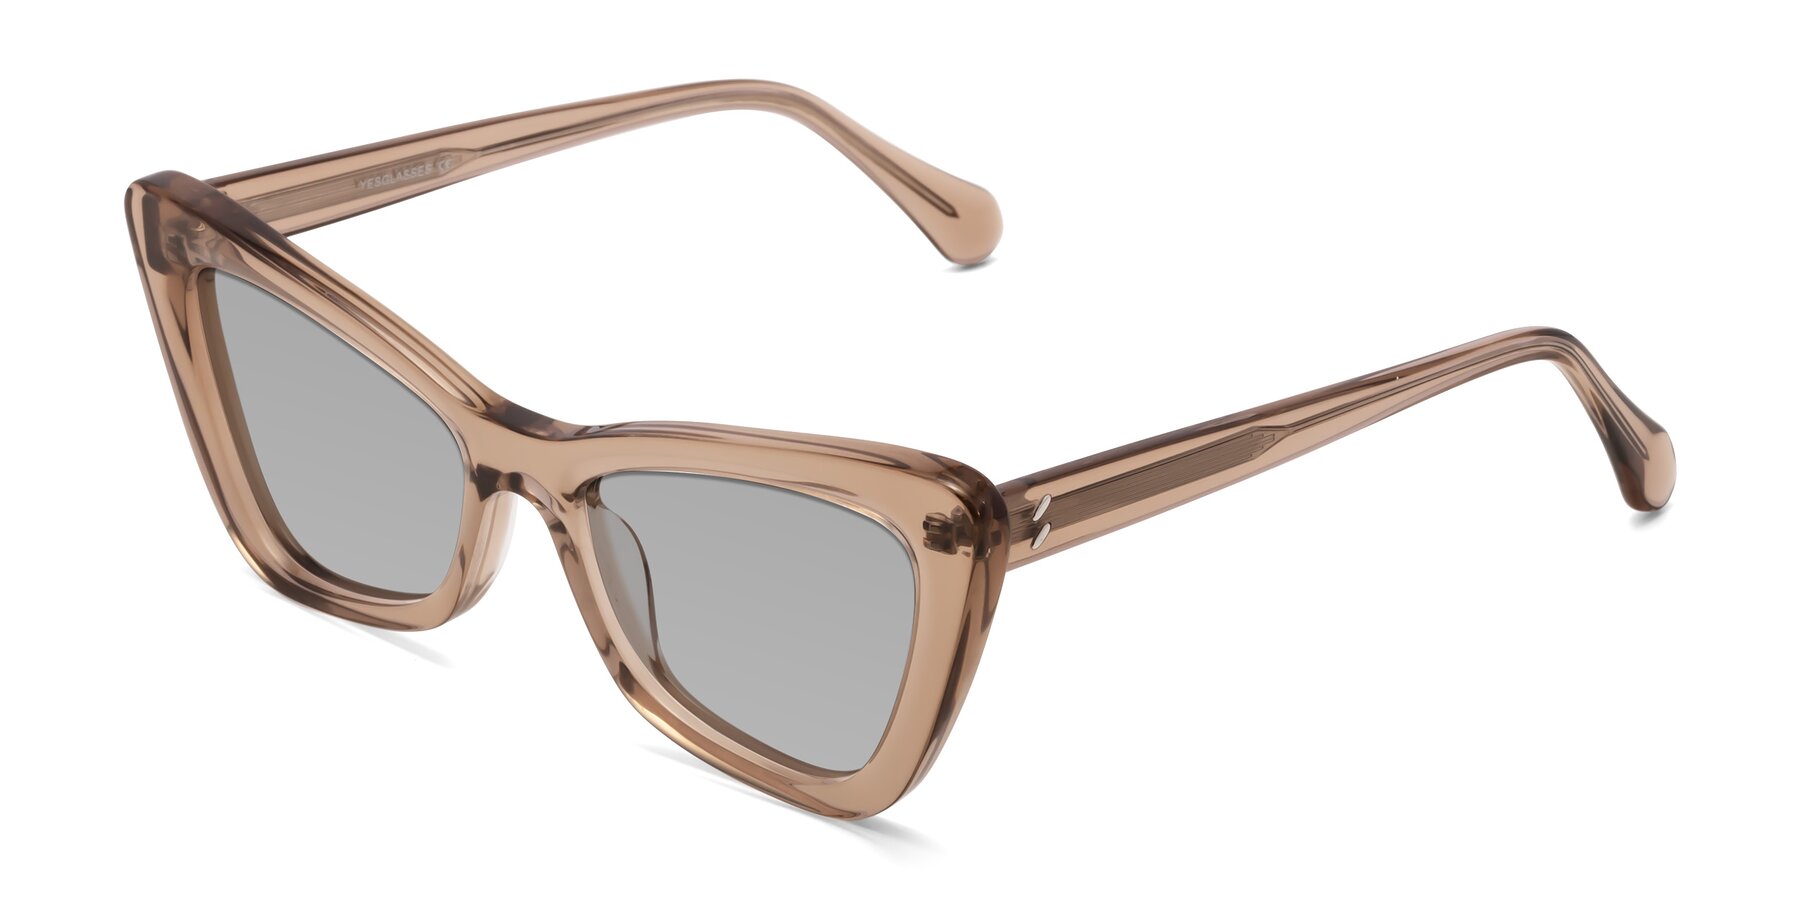 Angle of Rua in Caramel with Light Gray Tinted Lenses